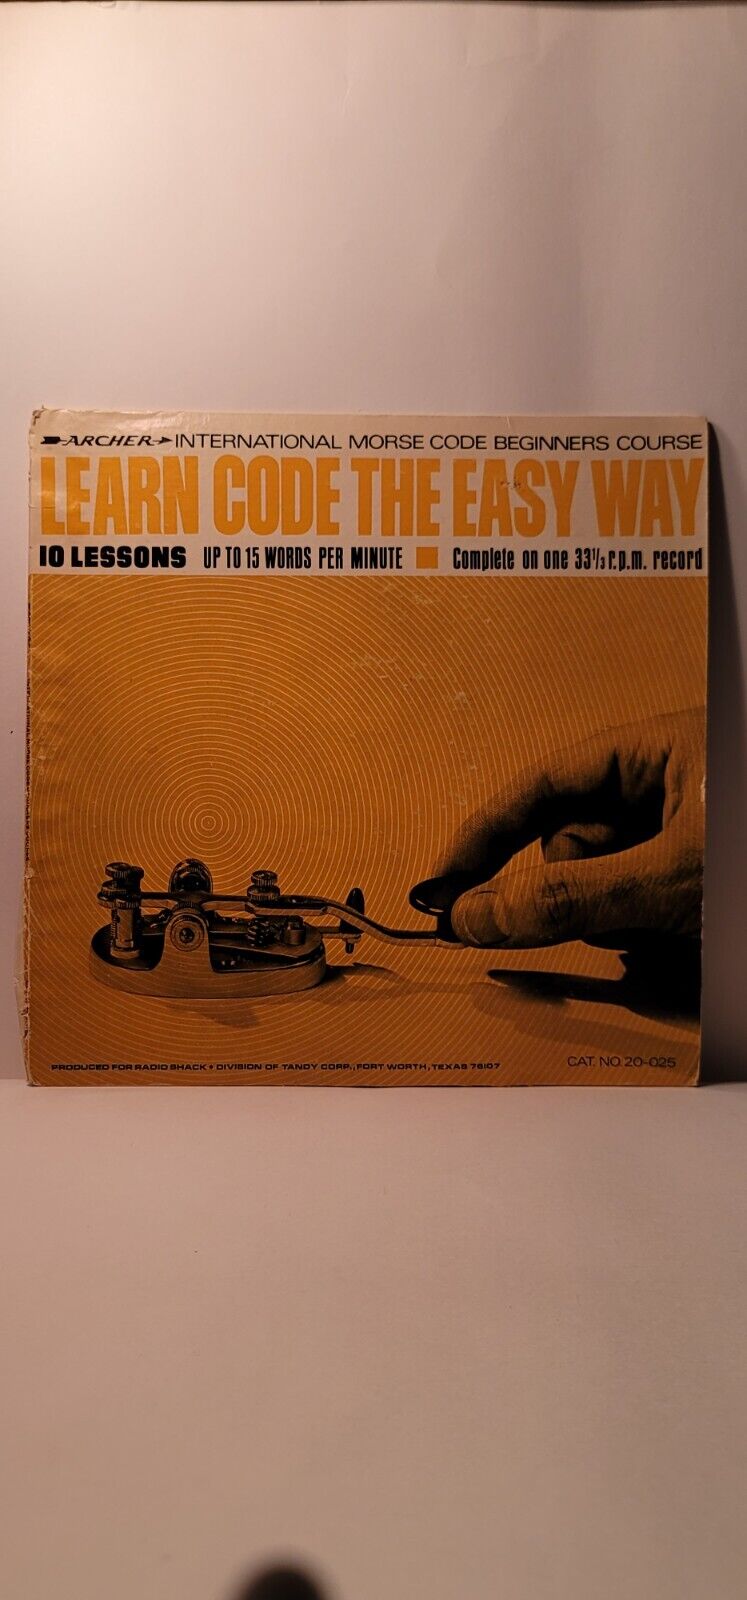 Morse Code beginners Course-Learn to Code the Easy Way LP  VG+/VG to VG+